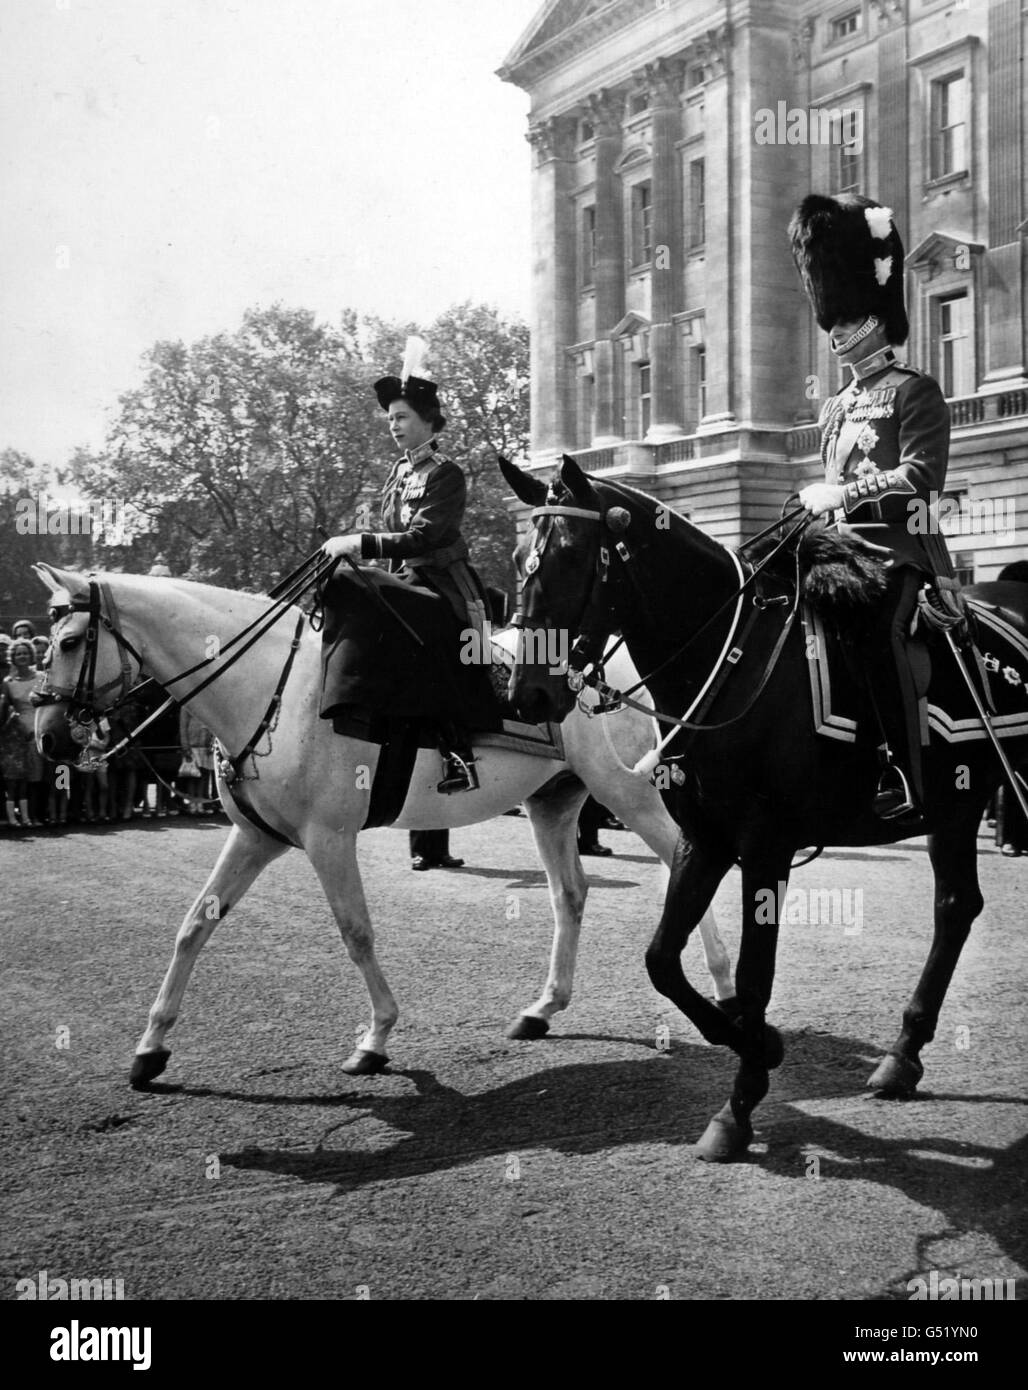 Queen Elizabeth II riding side-saddle on a new mount - a grey police horse named Doctor - leaves Buckingham Palace with the Duke of Edinburgh for the Trooping the Colour ceremony on the Horse Guards Parade. Stock Photo